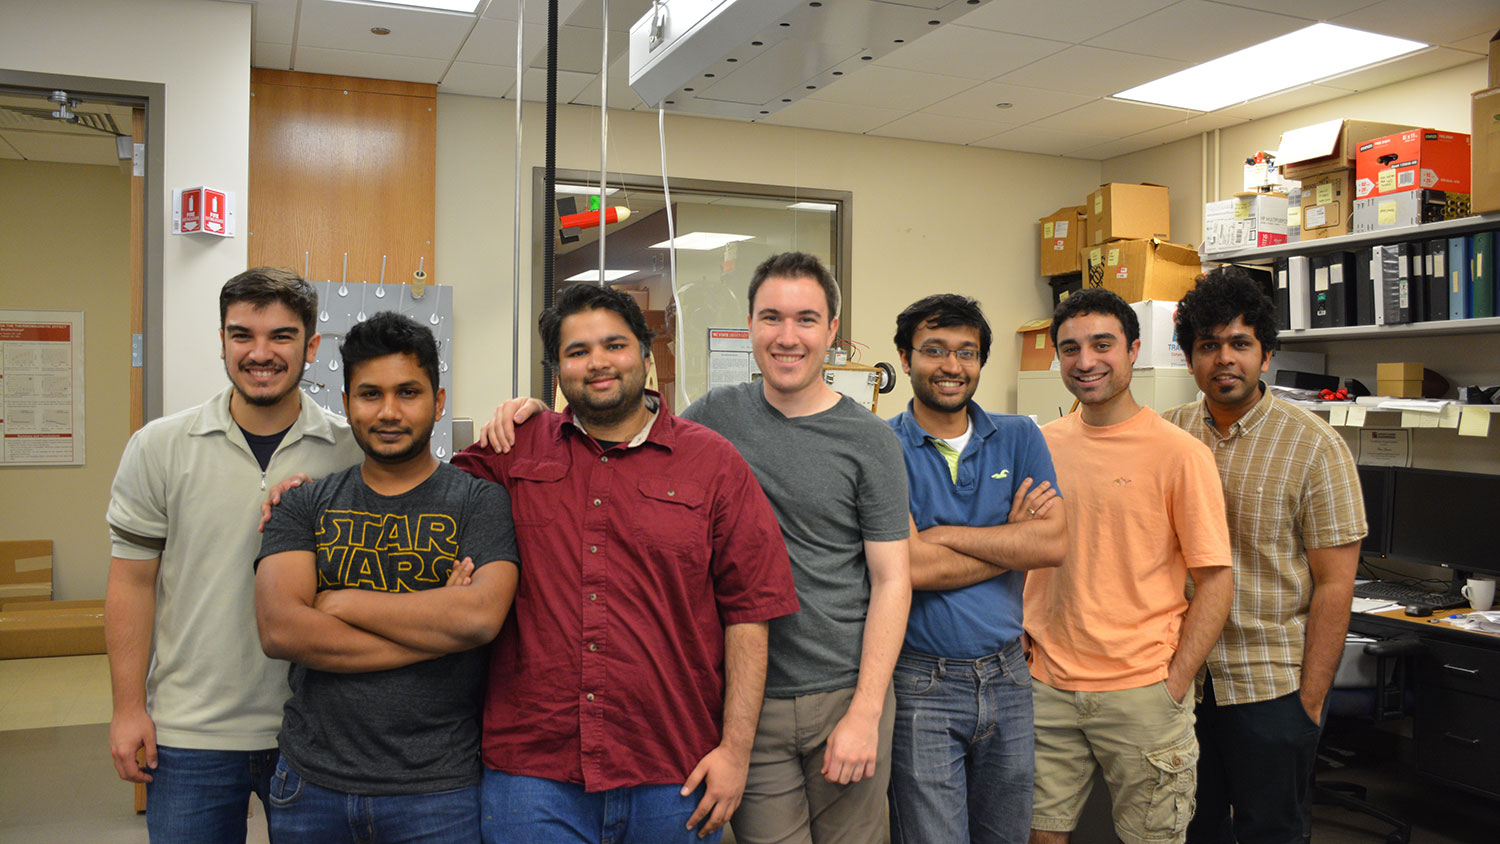 Appetite for Ice team members, pictured left to right: Arthur Candido, Aman Patel, Saurabh Agrawal, Kevin Ley, Punnag Chatterjee, Danny Tyler and Raj Nikhil Gerard.